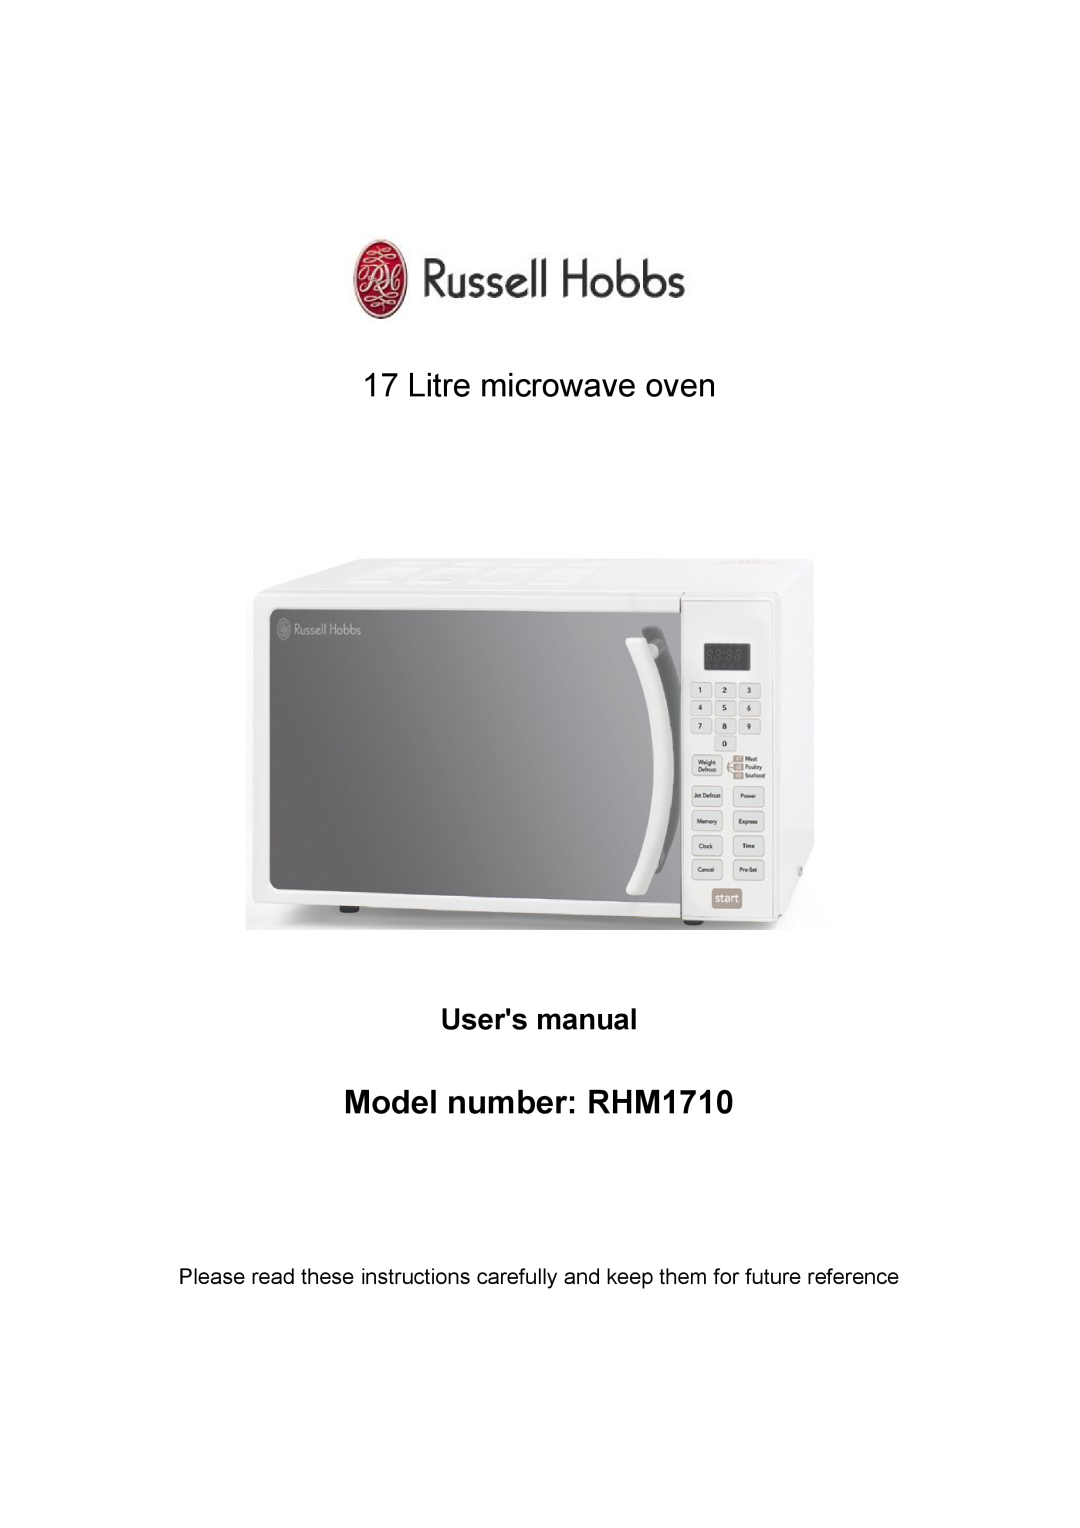 Russell Hobbs user manual Litre microwave oven, Model number RHM1710, Users manual 